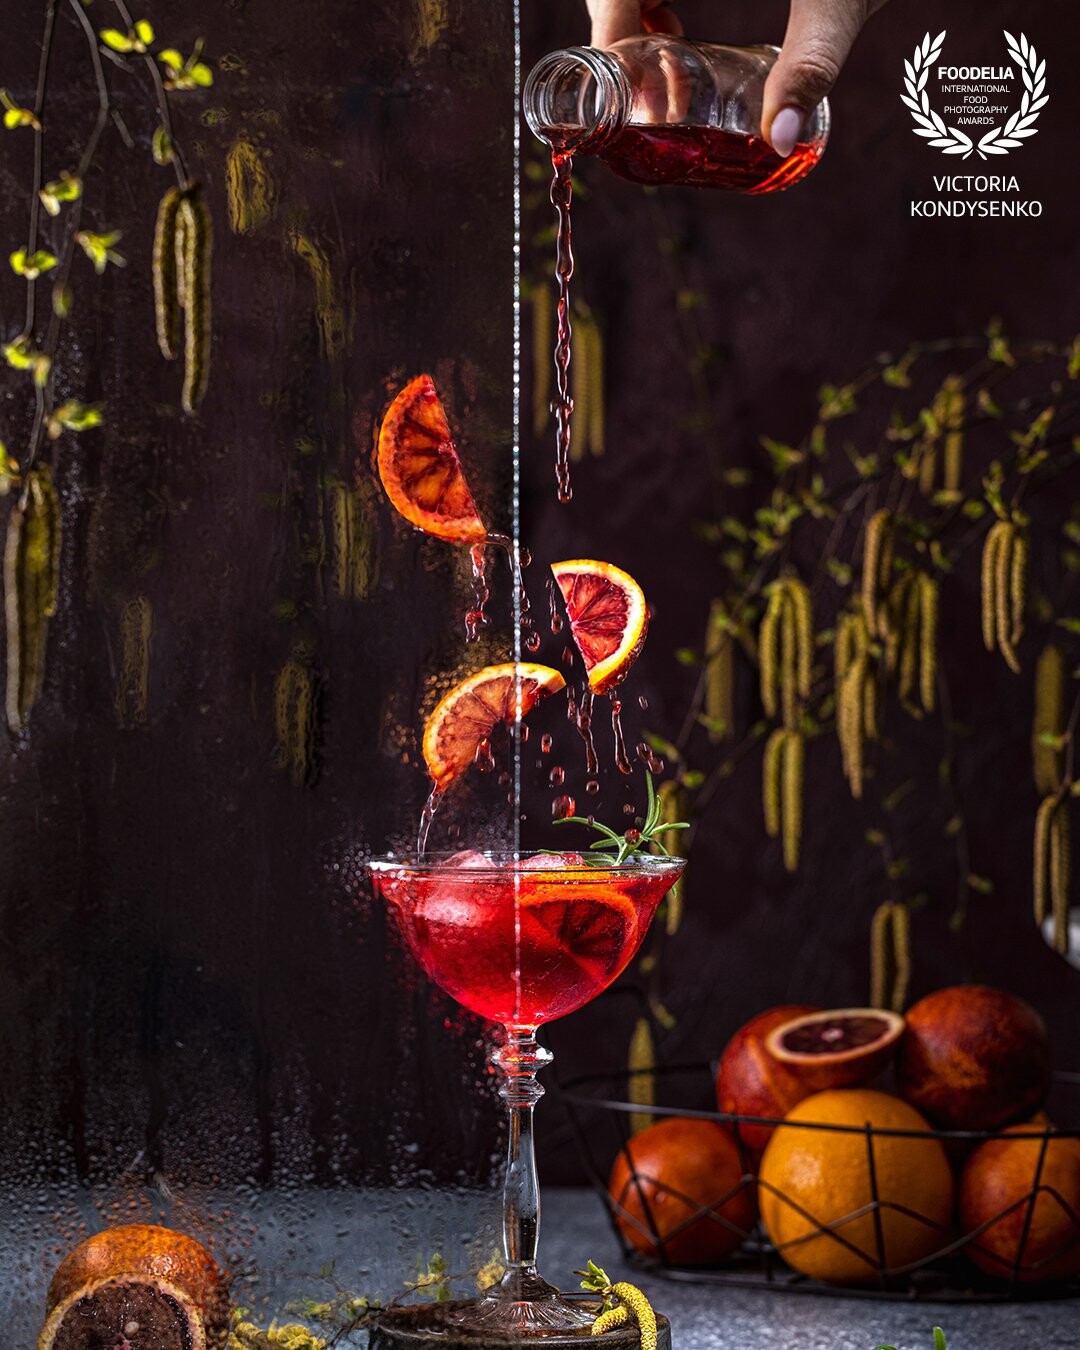 Sparkling Blood Orange Cocktail<br />
Cocktail of love and passion<br />
Secrets behind glass with water drops. Filling and splash as relationship display